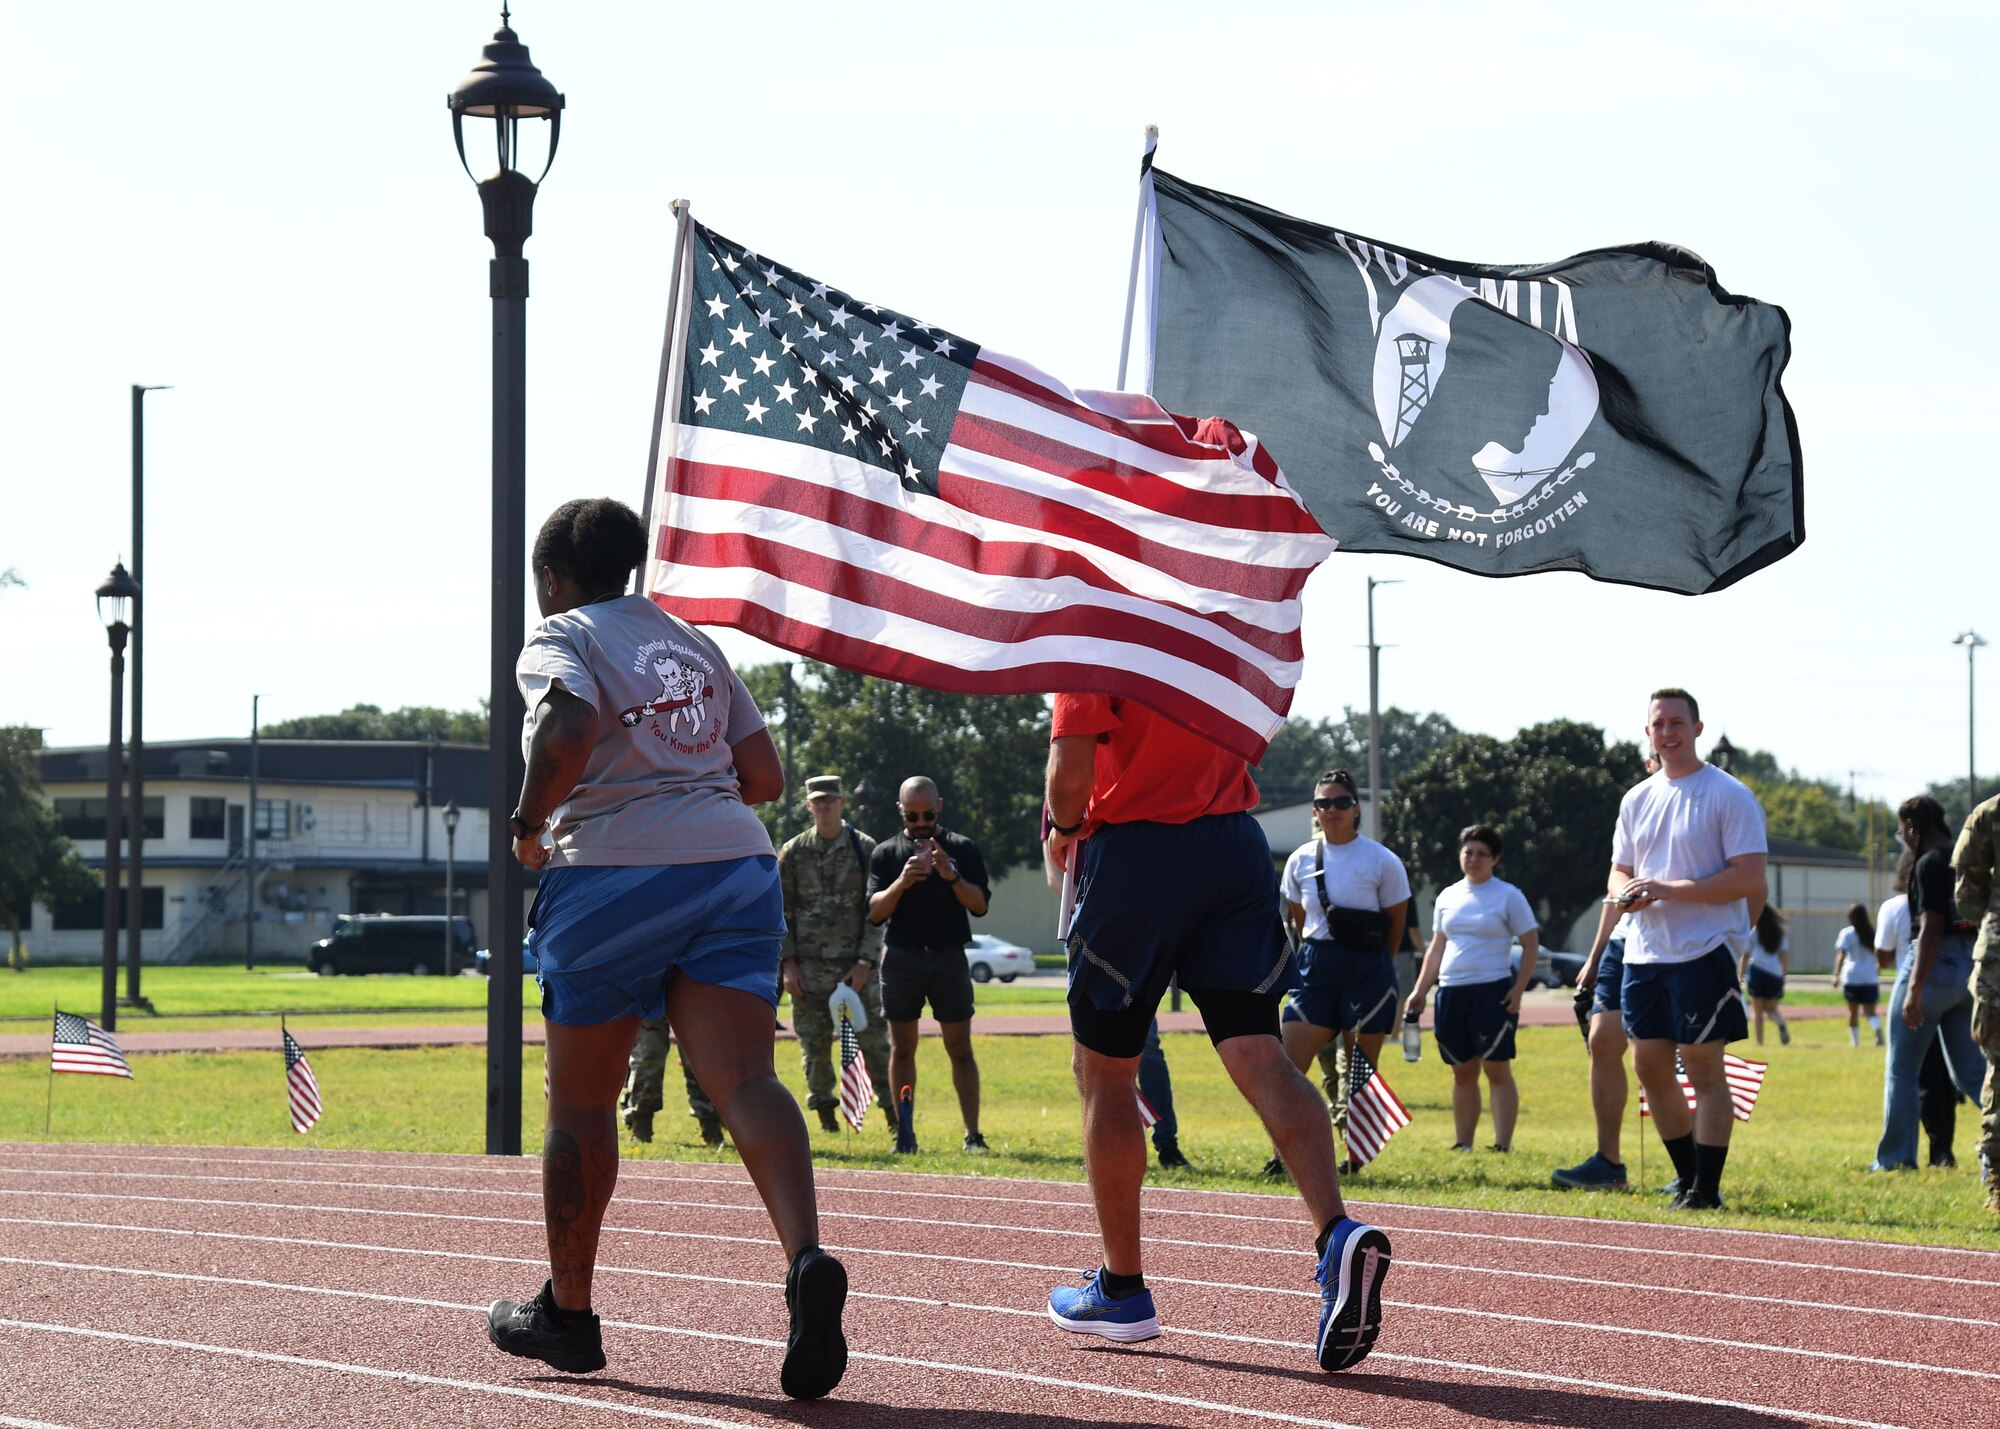 U.S. Air Force Senior Airman Destiny Sinalley, 81st Dental Squadron dental technician, and Tech. Sgt. Frankie Hitchcock, 336th Training Squadron instructor, participate in the POW/MIA run and vigil at the triangle track on Keesler Air Force Base, Mississippi, Sept. 16, 2022. The event, hosted by the Air Force Sergeants Association Chapter 652, is held annually to raise awareness and pay tribute to all prisoners of war and the military members still missing in action. (U.S. Air Force photo by Kemberly Groue)